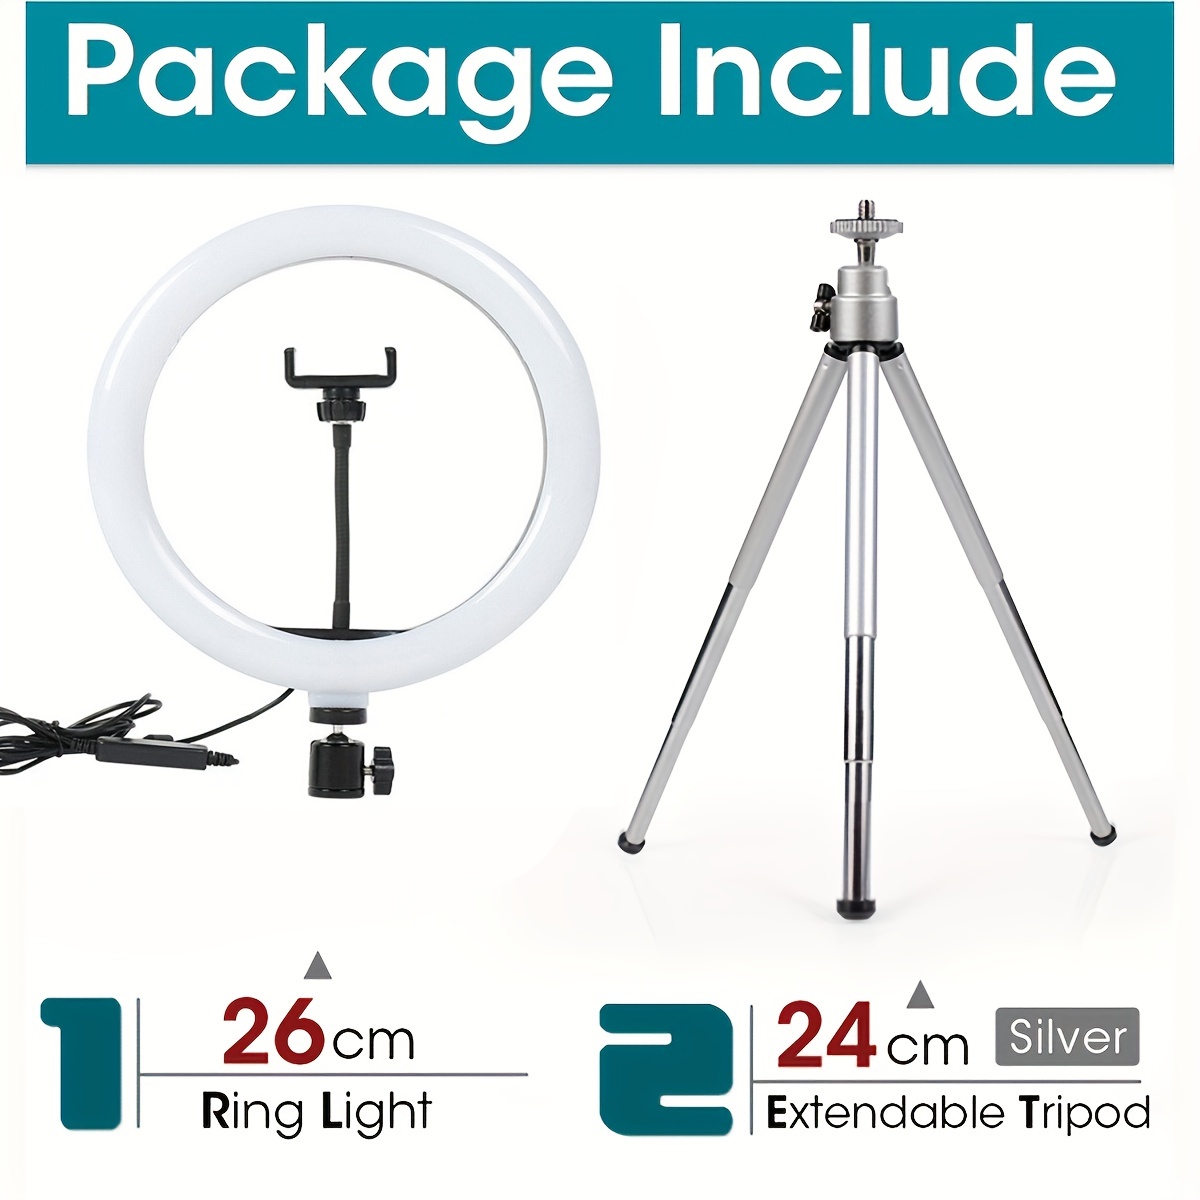 Standing Selfie Light, 26 cm Ring Light With 3 Modes, Extendable